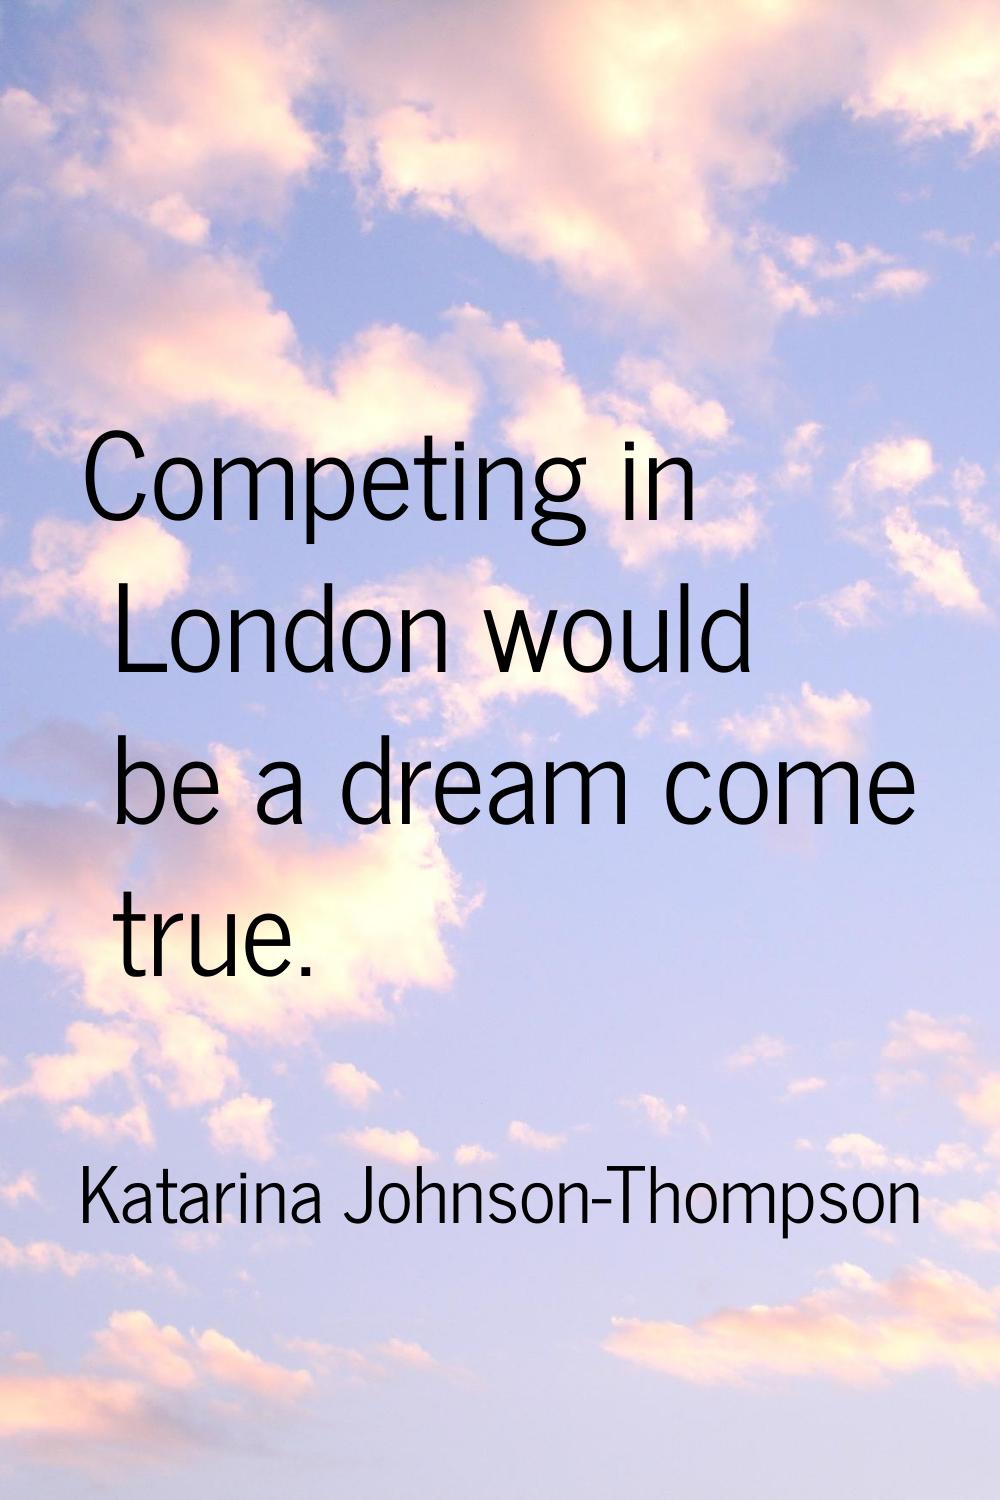 Competing in London would be a dream come true.